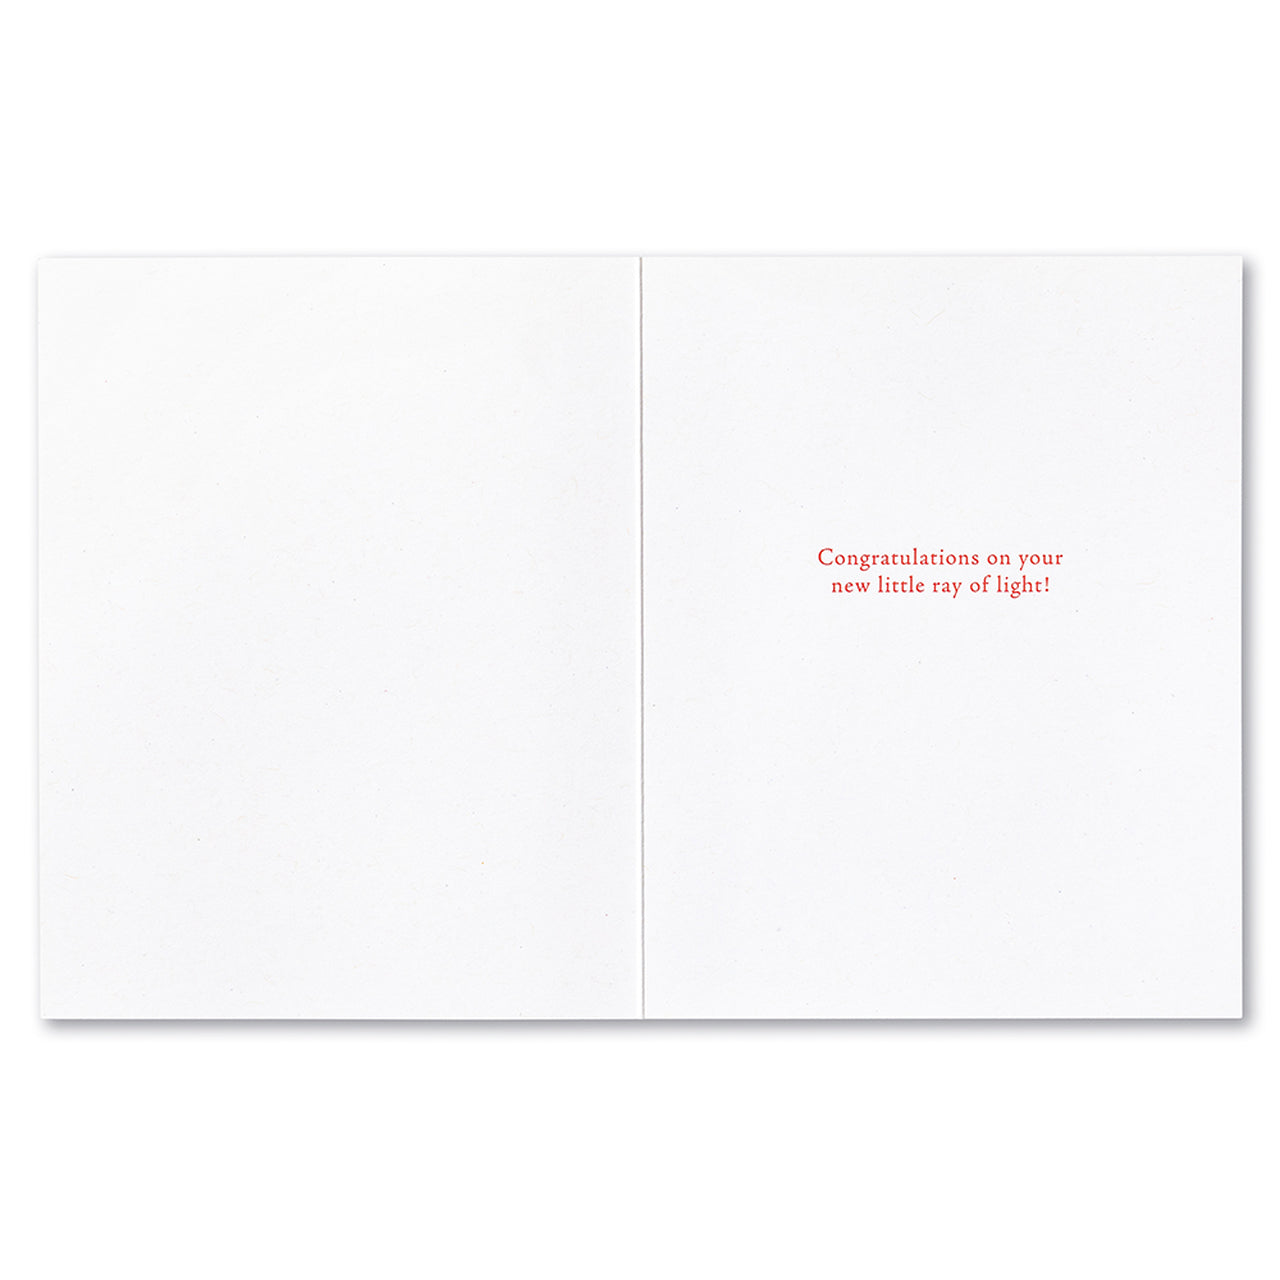 inside card is white with red text